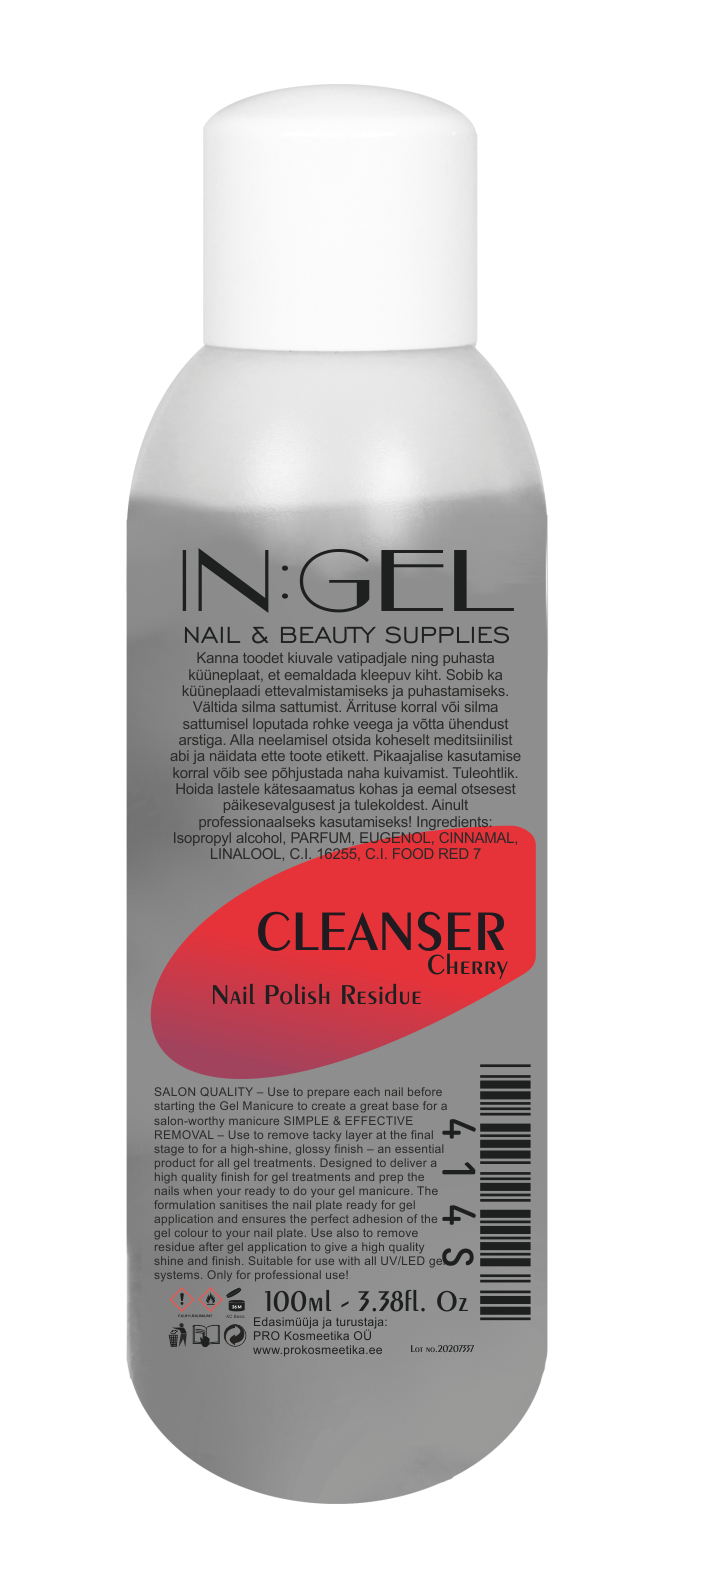 IN:GEL Nail Polish Residue Cleanser Scented